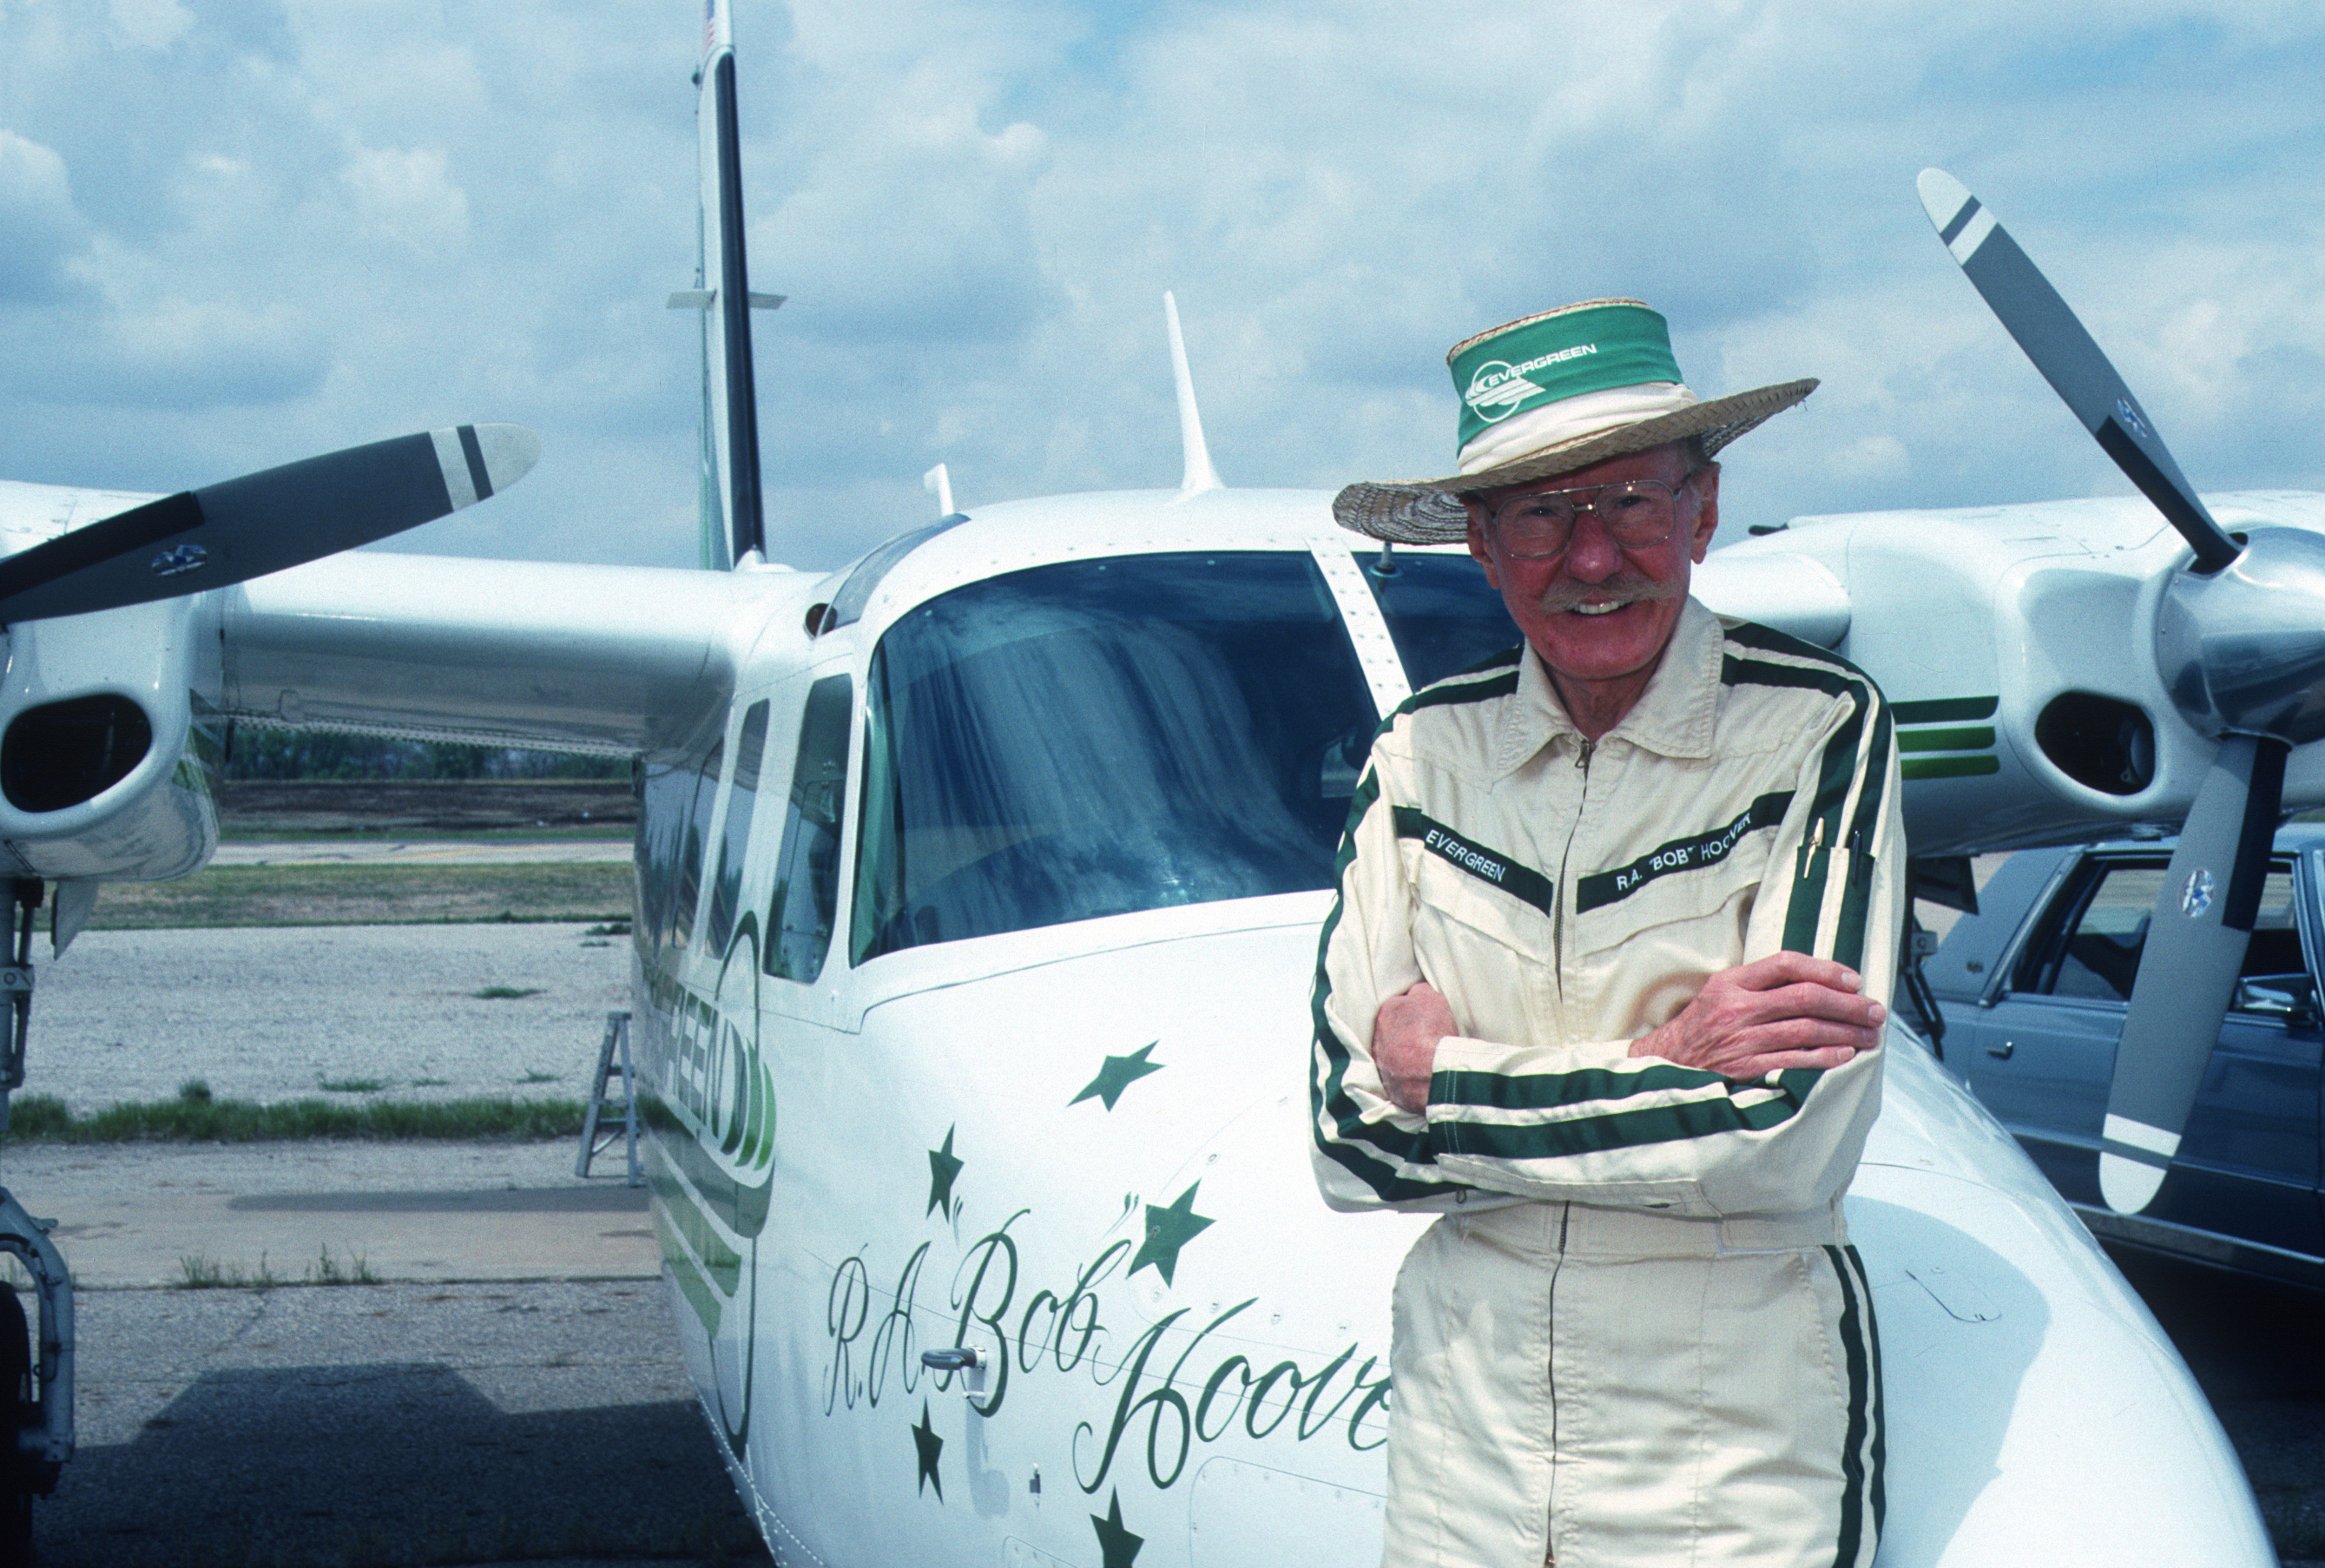 R.A. 'Bob' Hoover is remembered as one of the greatest pilots and inspired generations of aviators to follow in his footsteps. Courtesy photo.